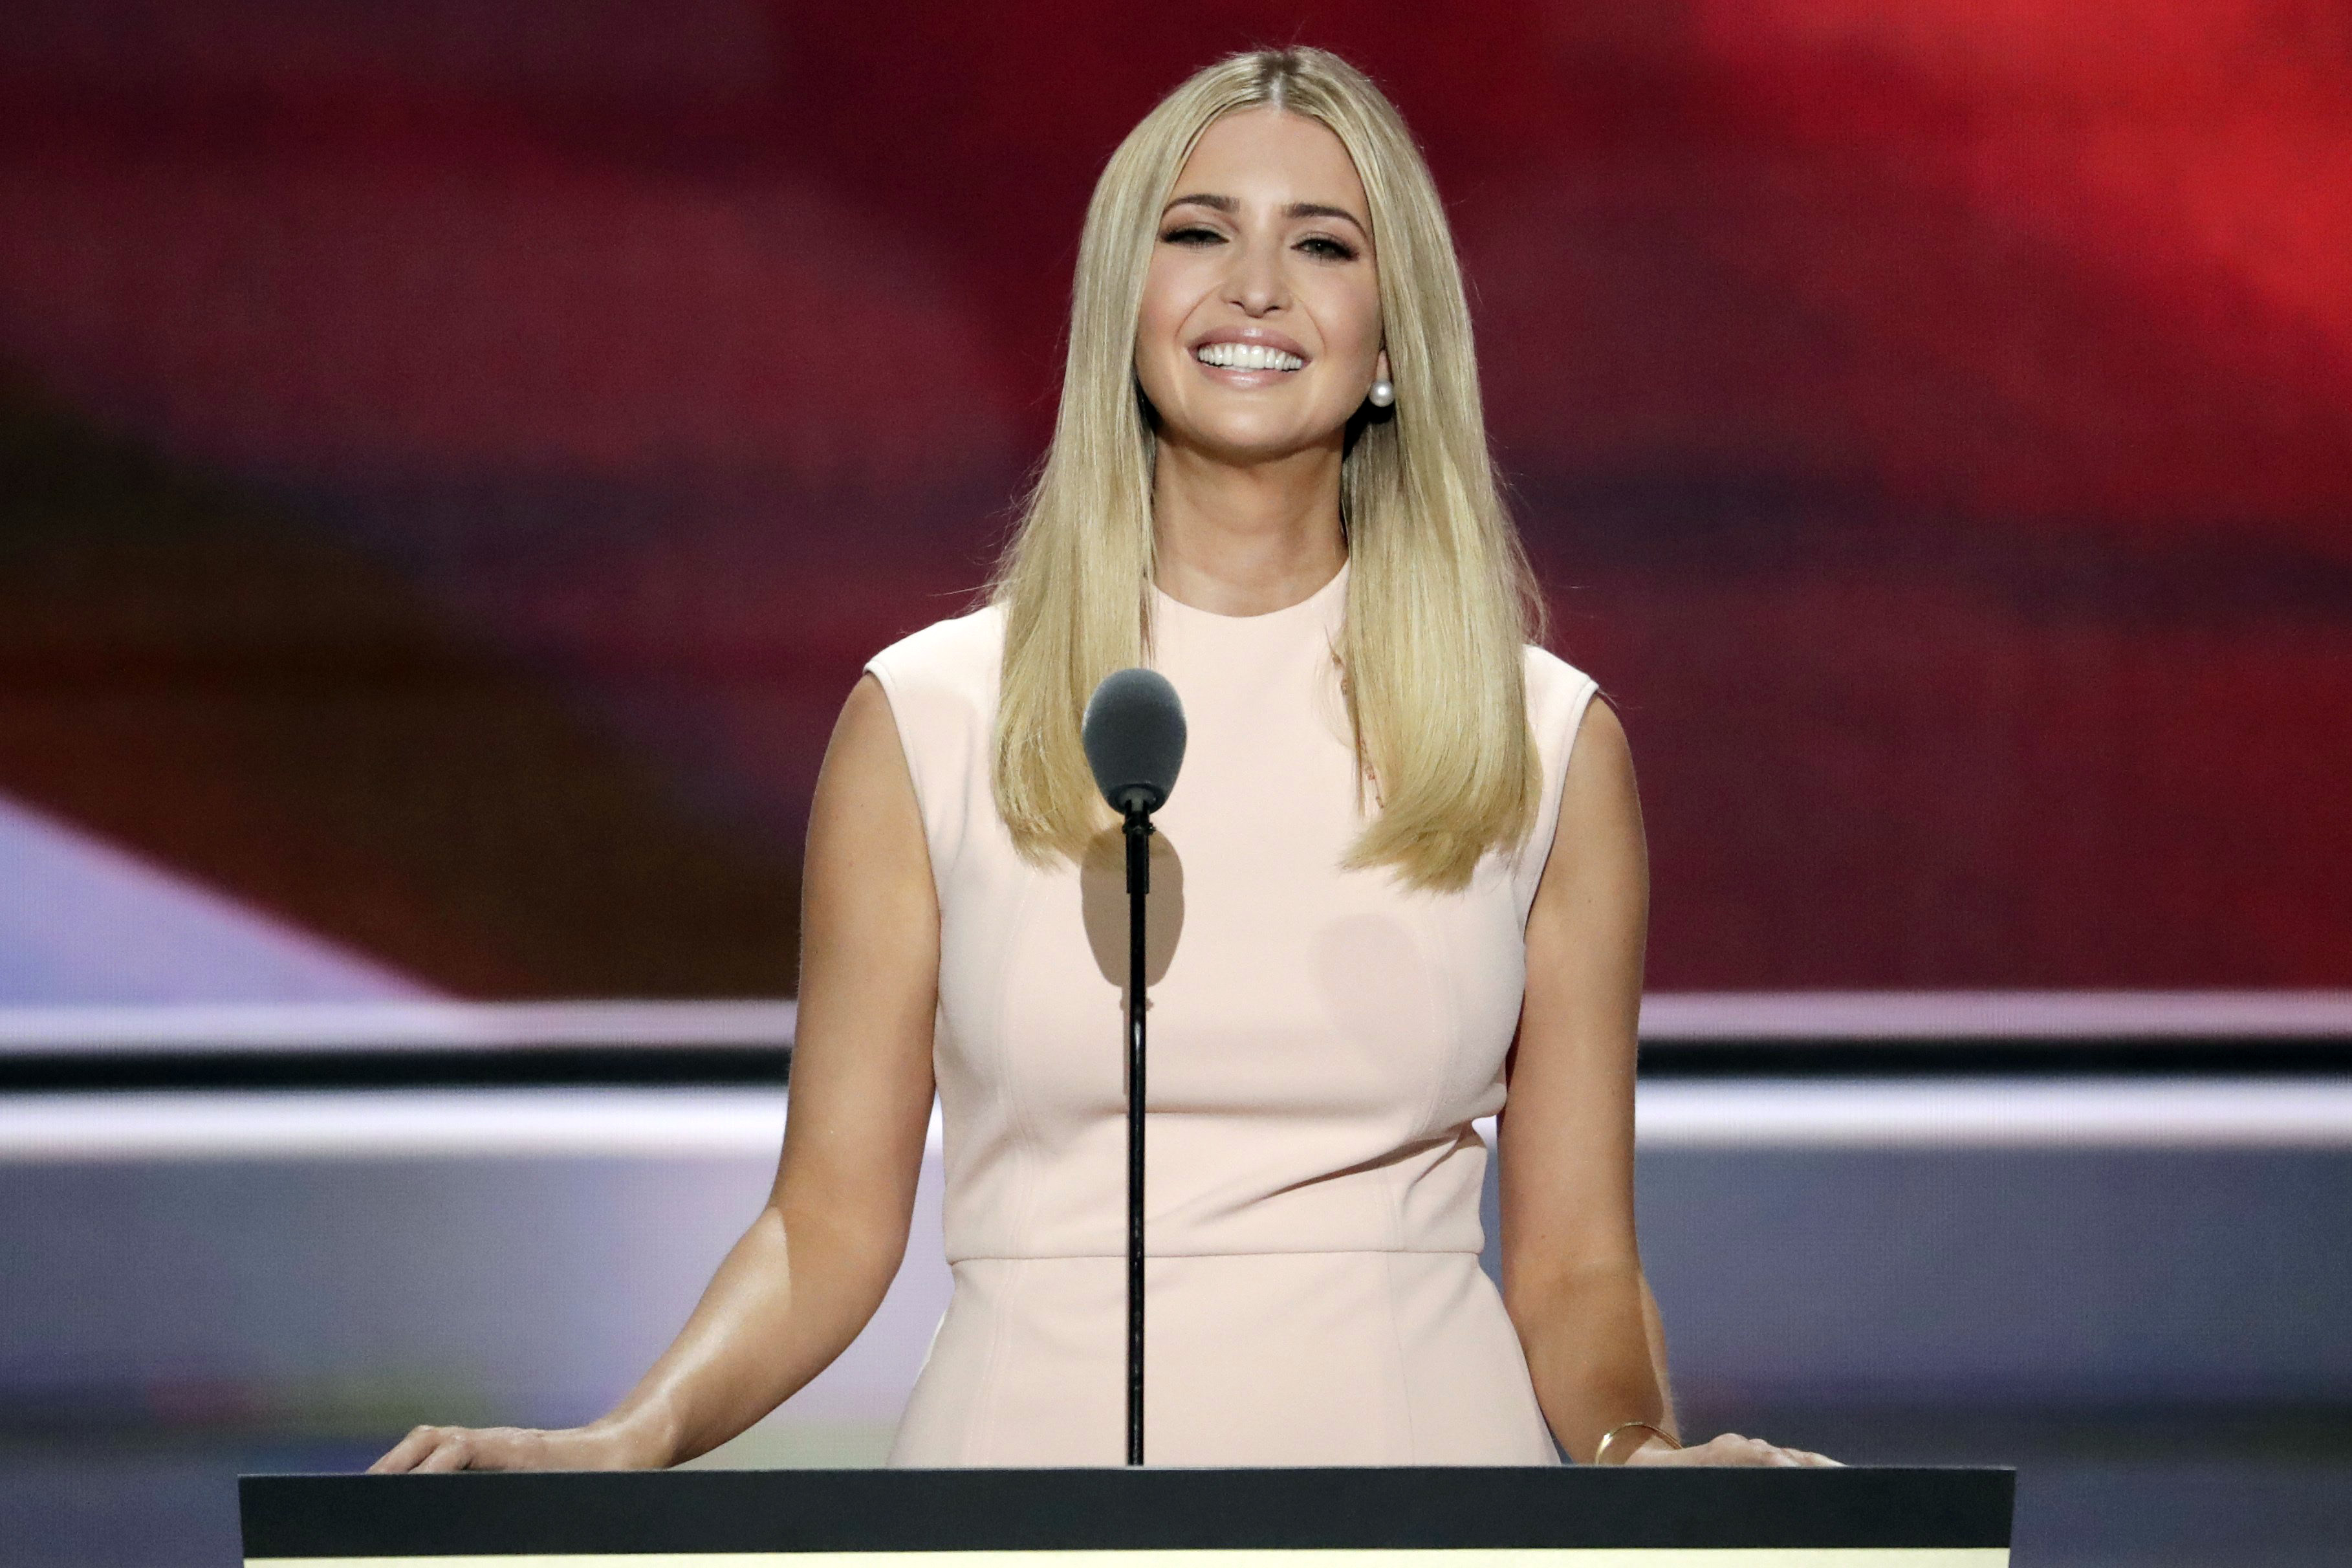 Ivanka Trump, daughter of Donald J. Trump, speaks during the final day of the Republican National Convention in Cleveland, Thursday, July 21, 2016. (J. Scott Applewhite—AP)